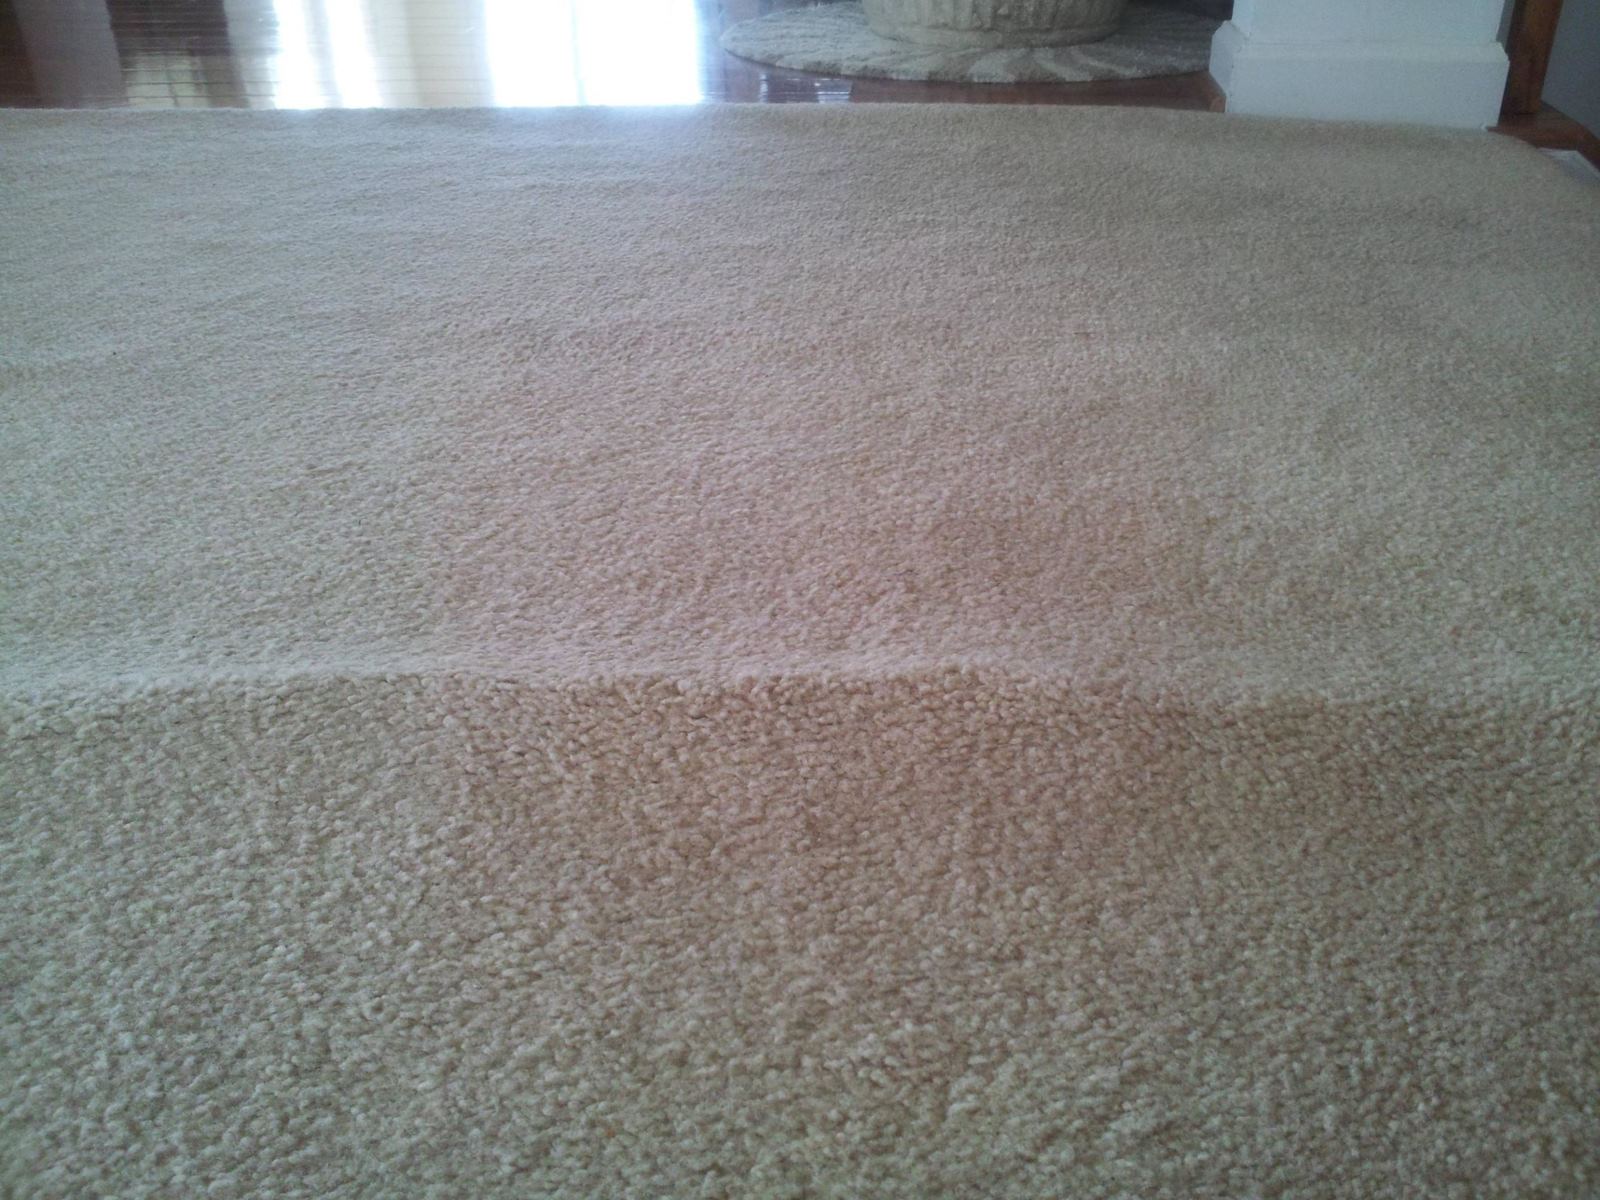 What Causes Carpet To Ripple